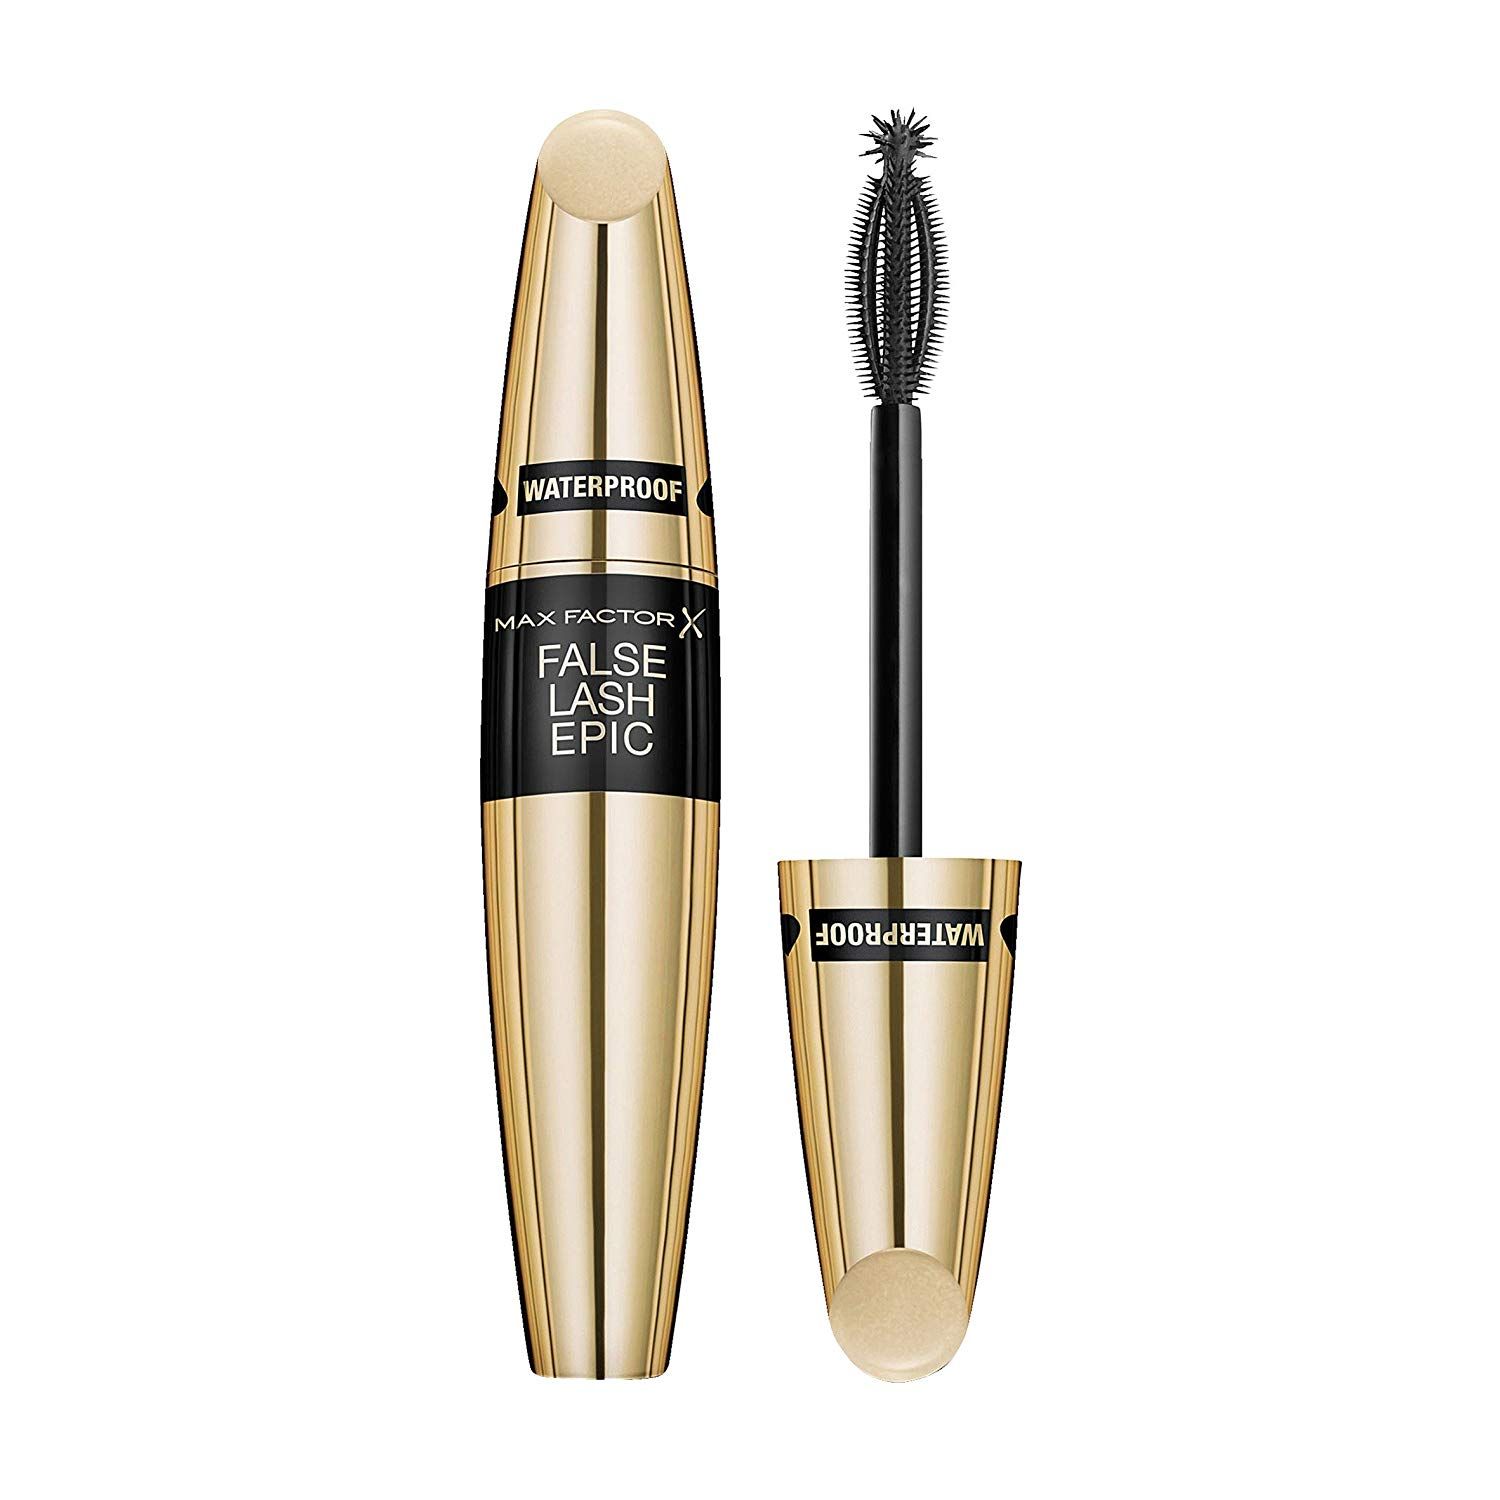 Max Factor False Lash Epic Mascara - create the epic lash fan. Designed to stand up to the zoom, False Lash Epic Mascara captures and magnifies every detail of every lash for an epic lash fan. Introducing the False Lash Epic Brush with Zoom-action Tip. The brush gives you the artistry of multiple brushes in one. The Zoom-action Tip magnifies your lash fan to epic proportions.